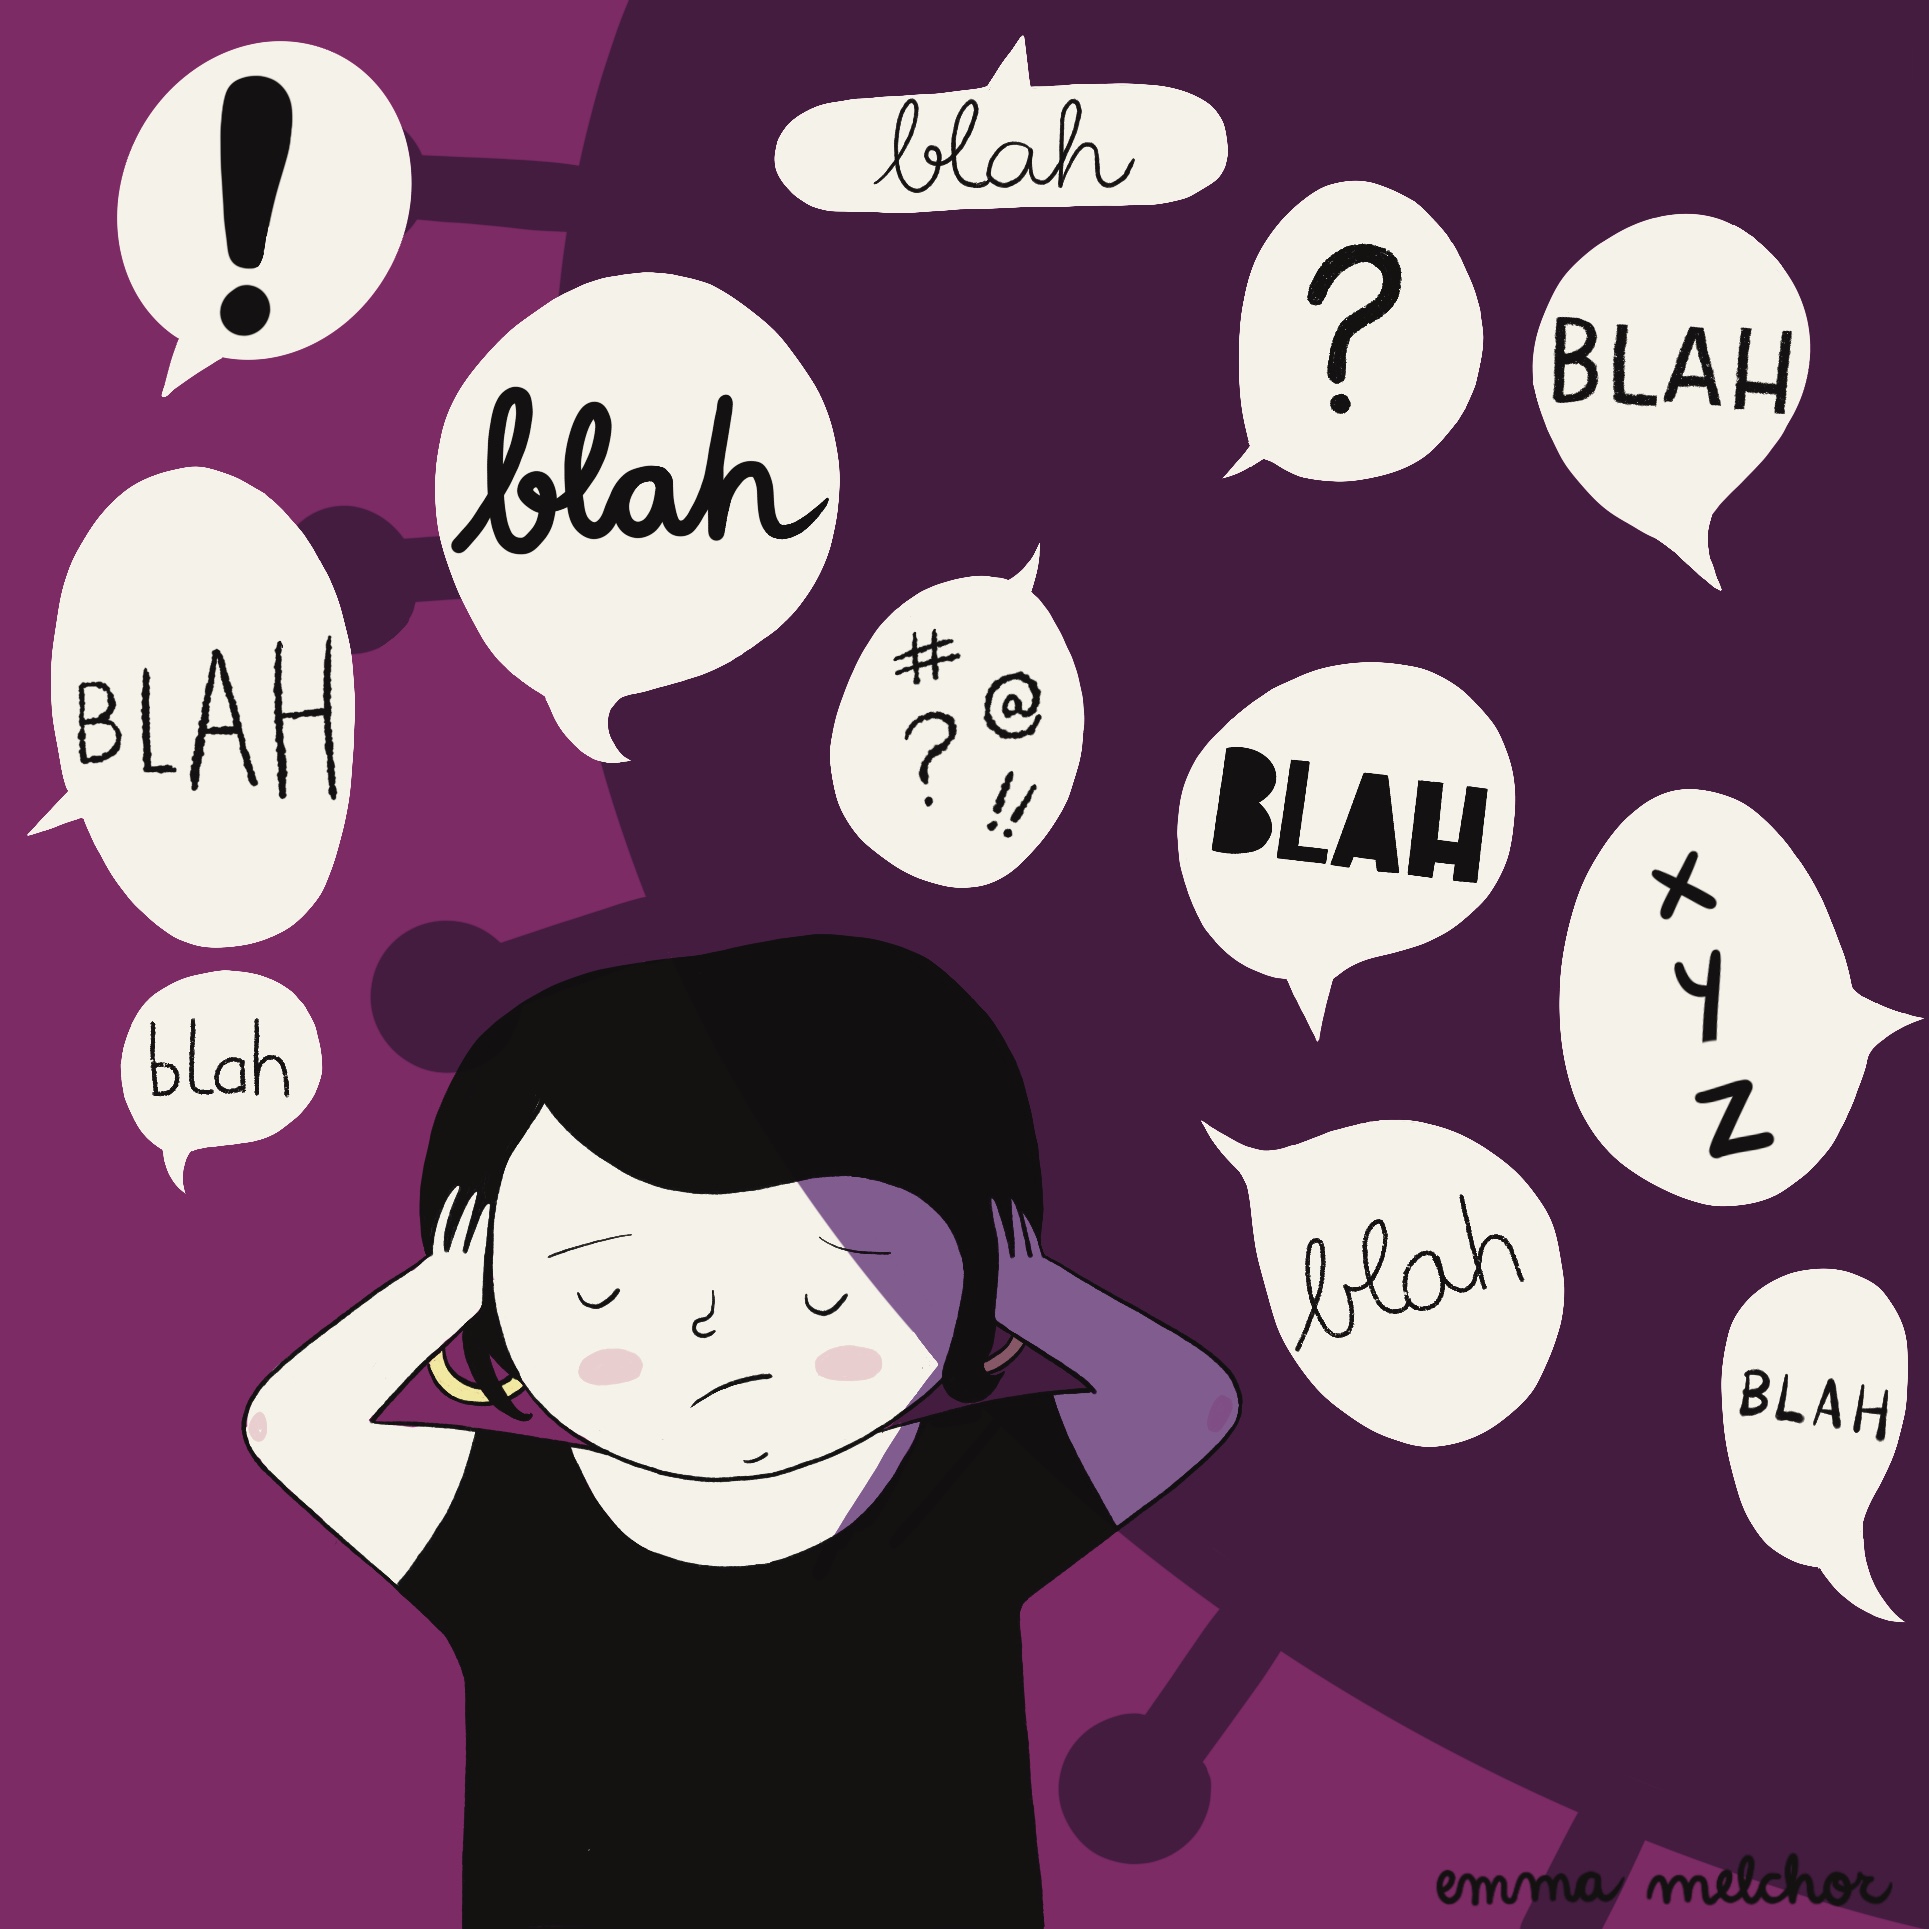 Drawing of person with hands over her ears ; multiple thought bubbles are around her head with "blah" or various gibberish